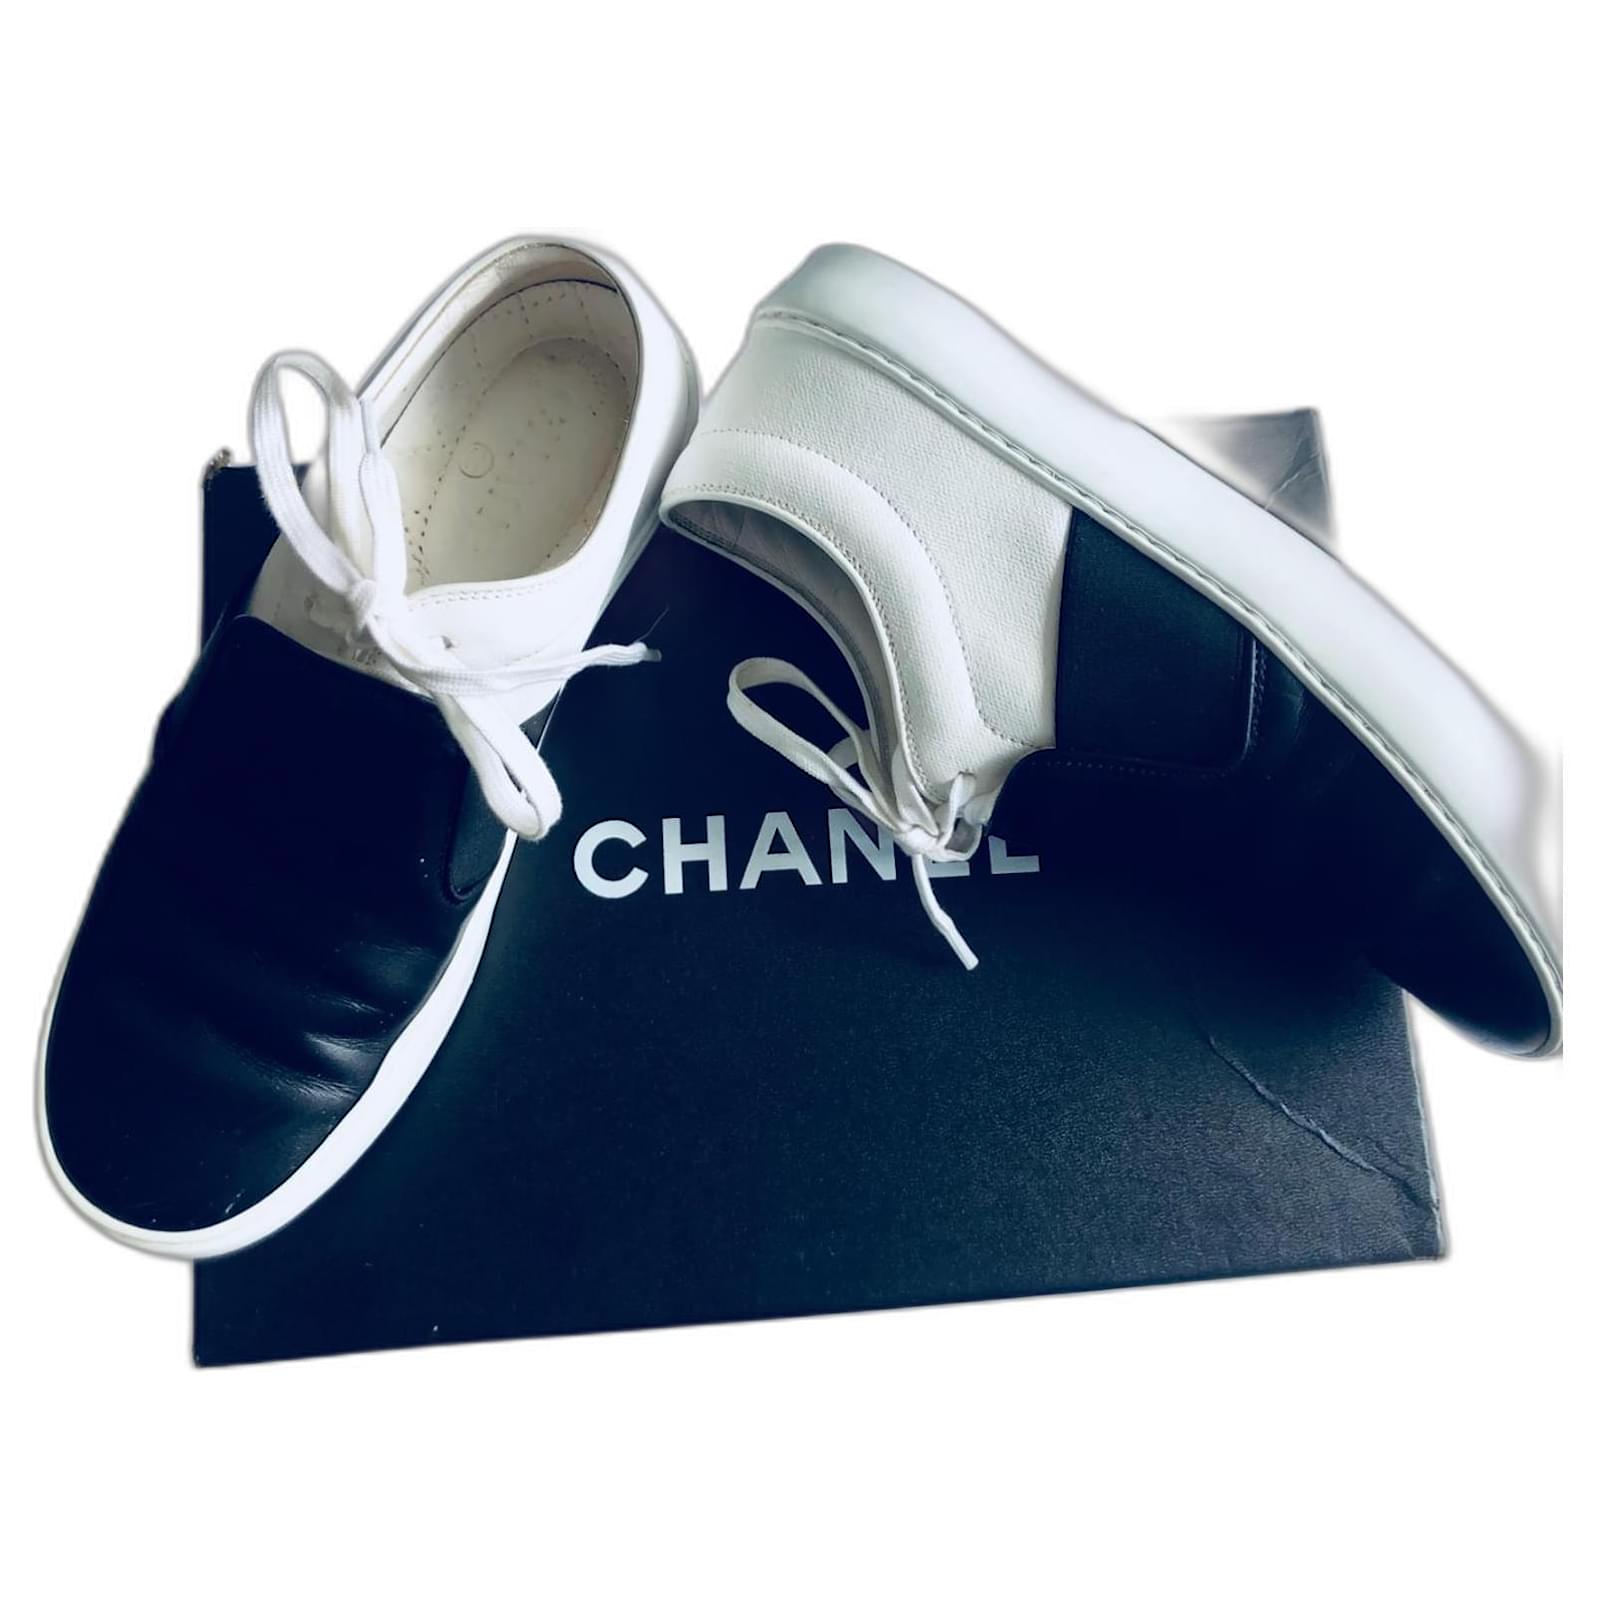 Sneakers Chanel Slip on Black and White Trainers Size 5 UK